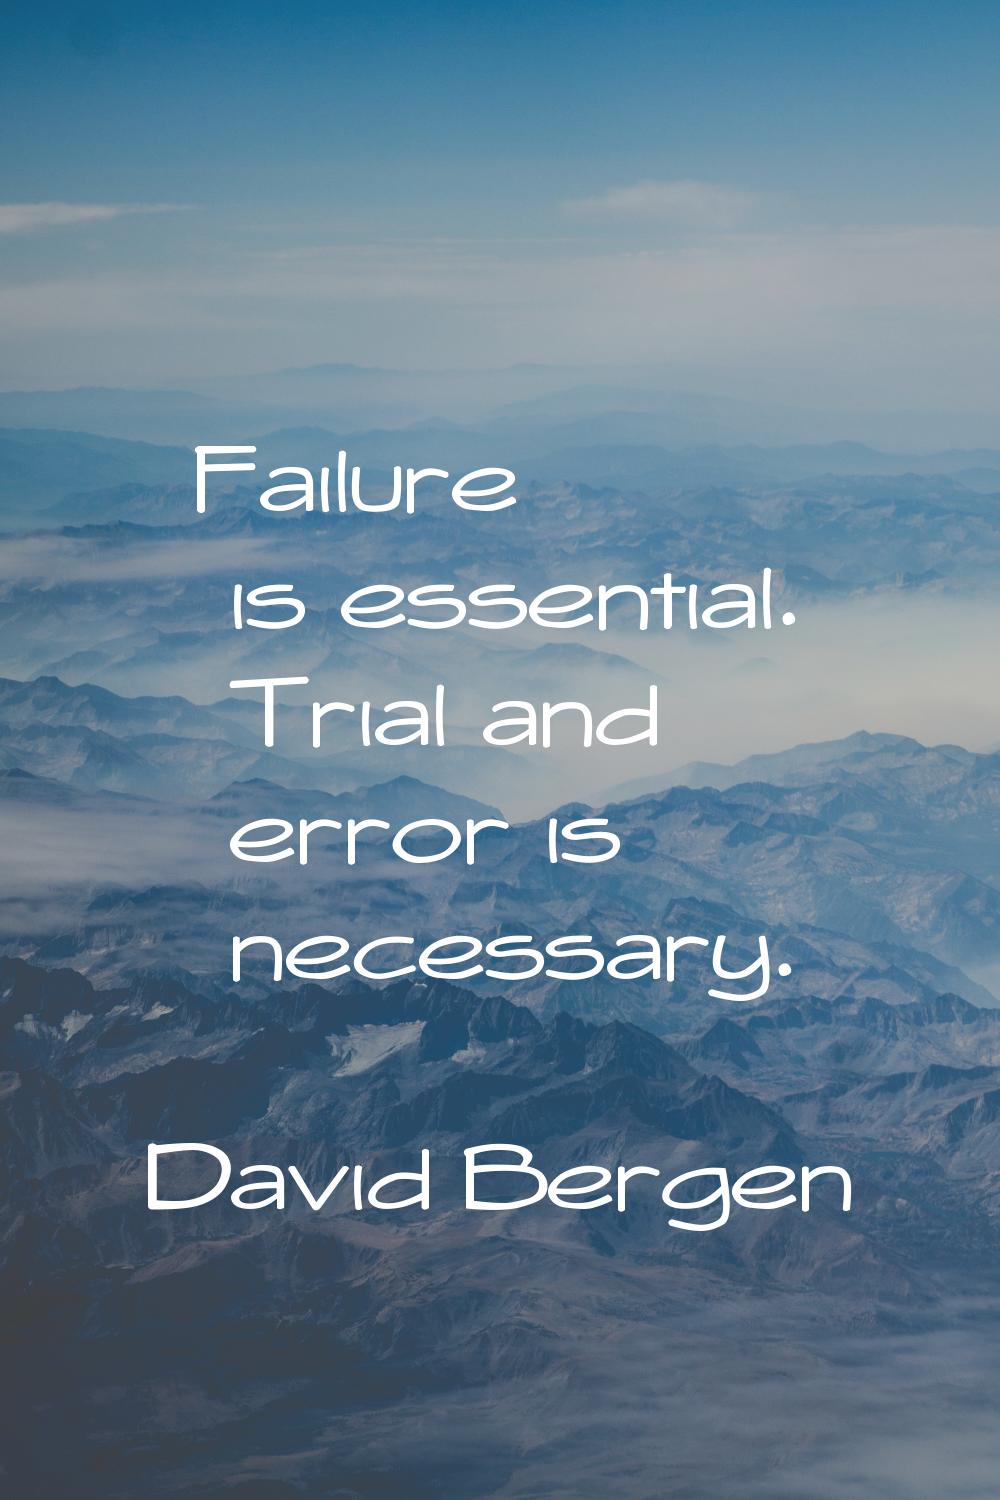 Failure is essential. Trial and error is necessary.